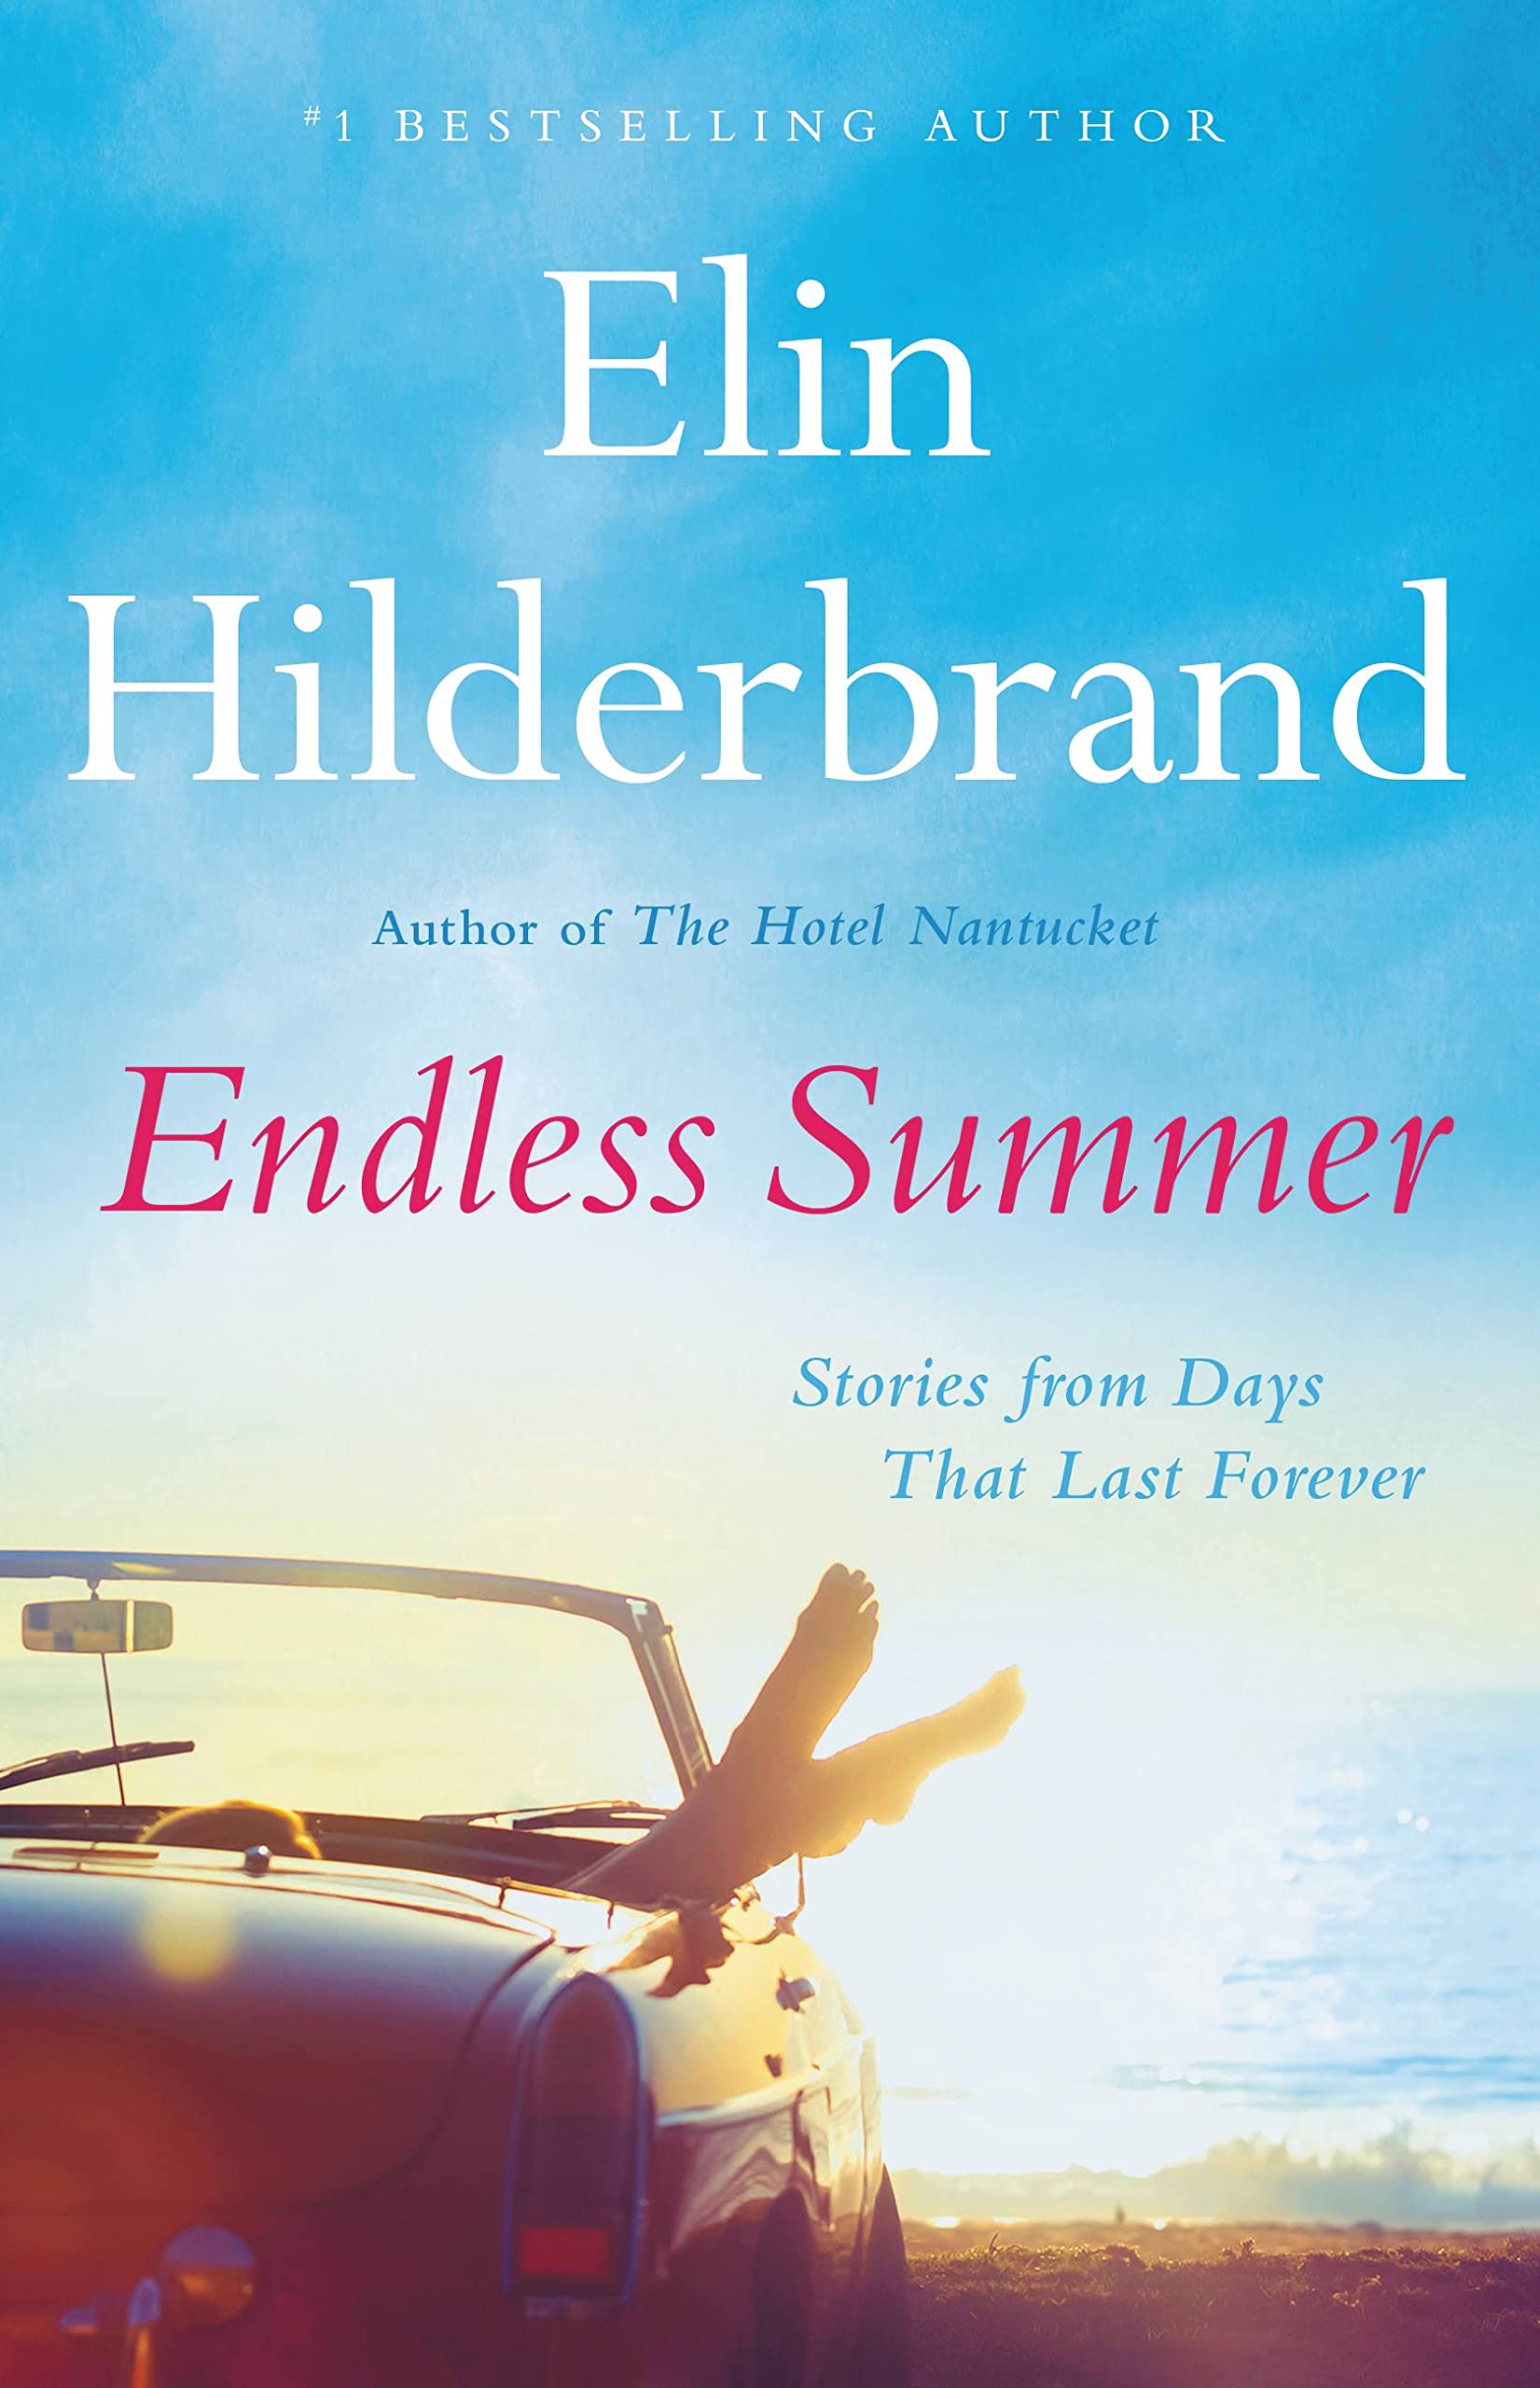 Image for "Endless Summer"